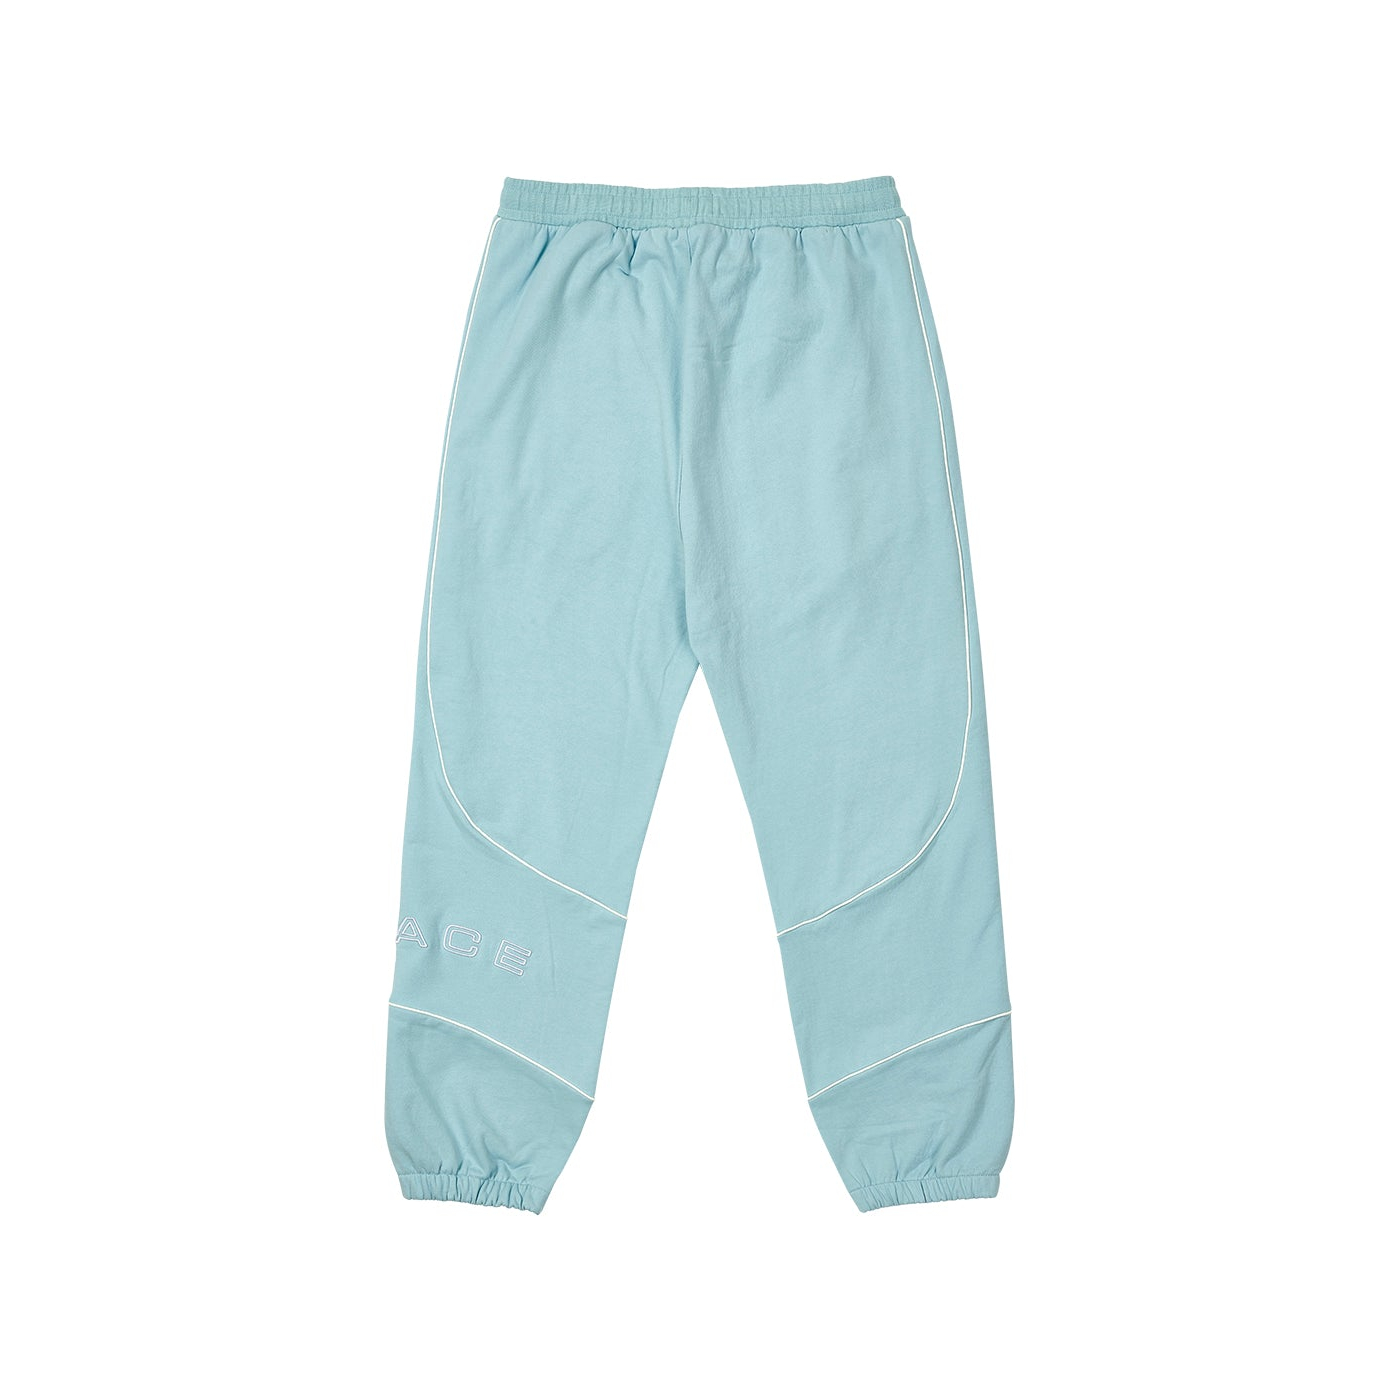 Thumbnail SPORT PIPED JOGGER CRSYTALISED BLUE one color